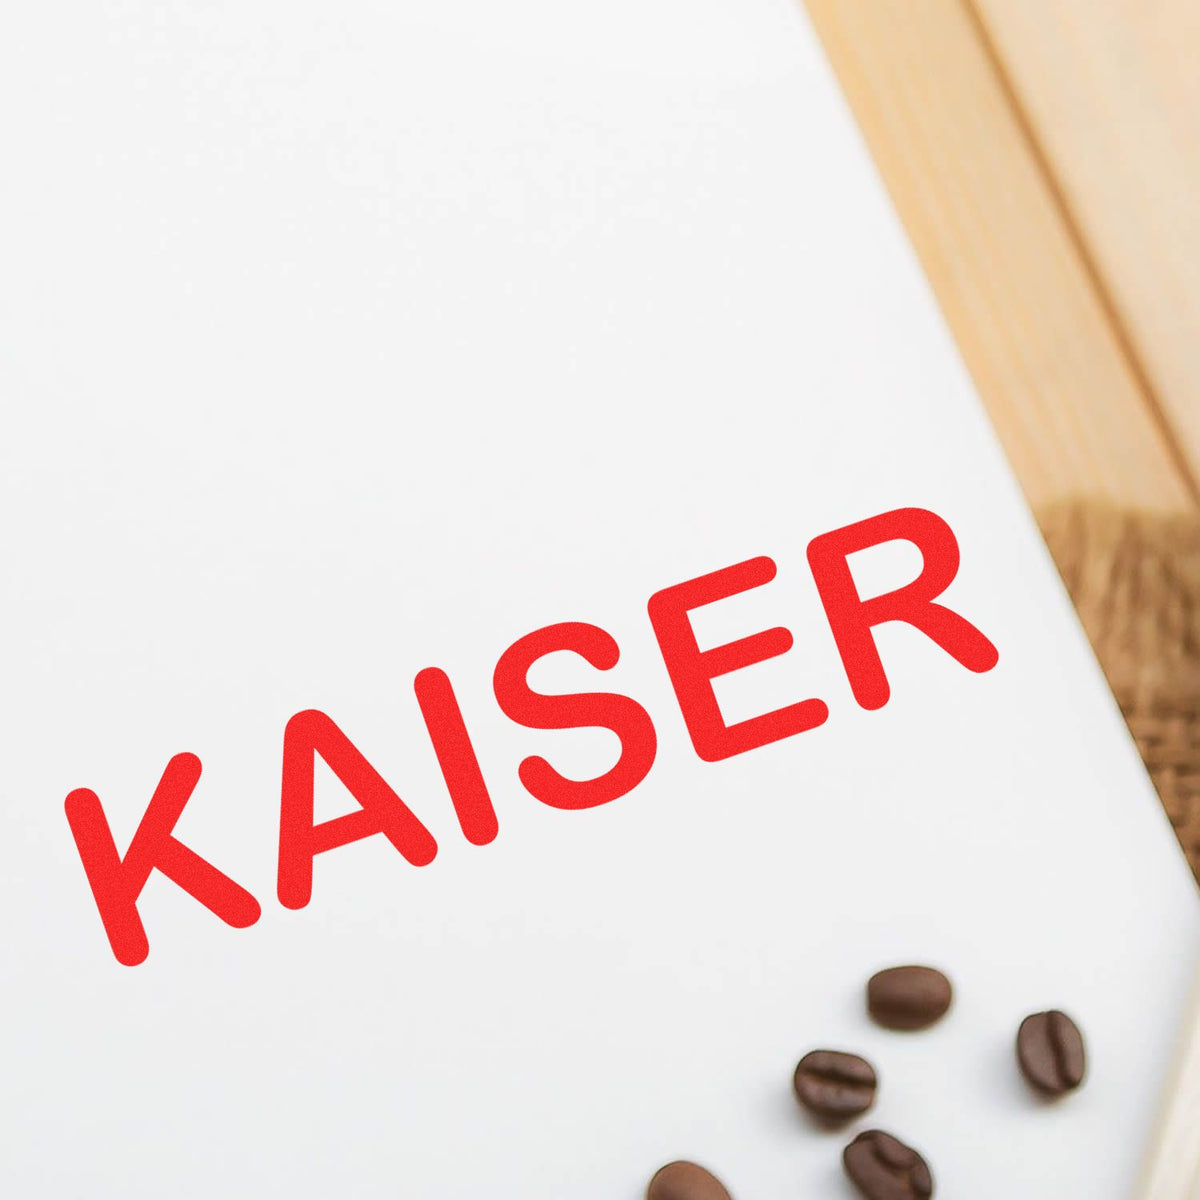 Medical Kaiser Rubber Stamp In Use Photo